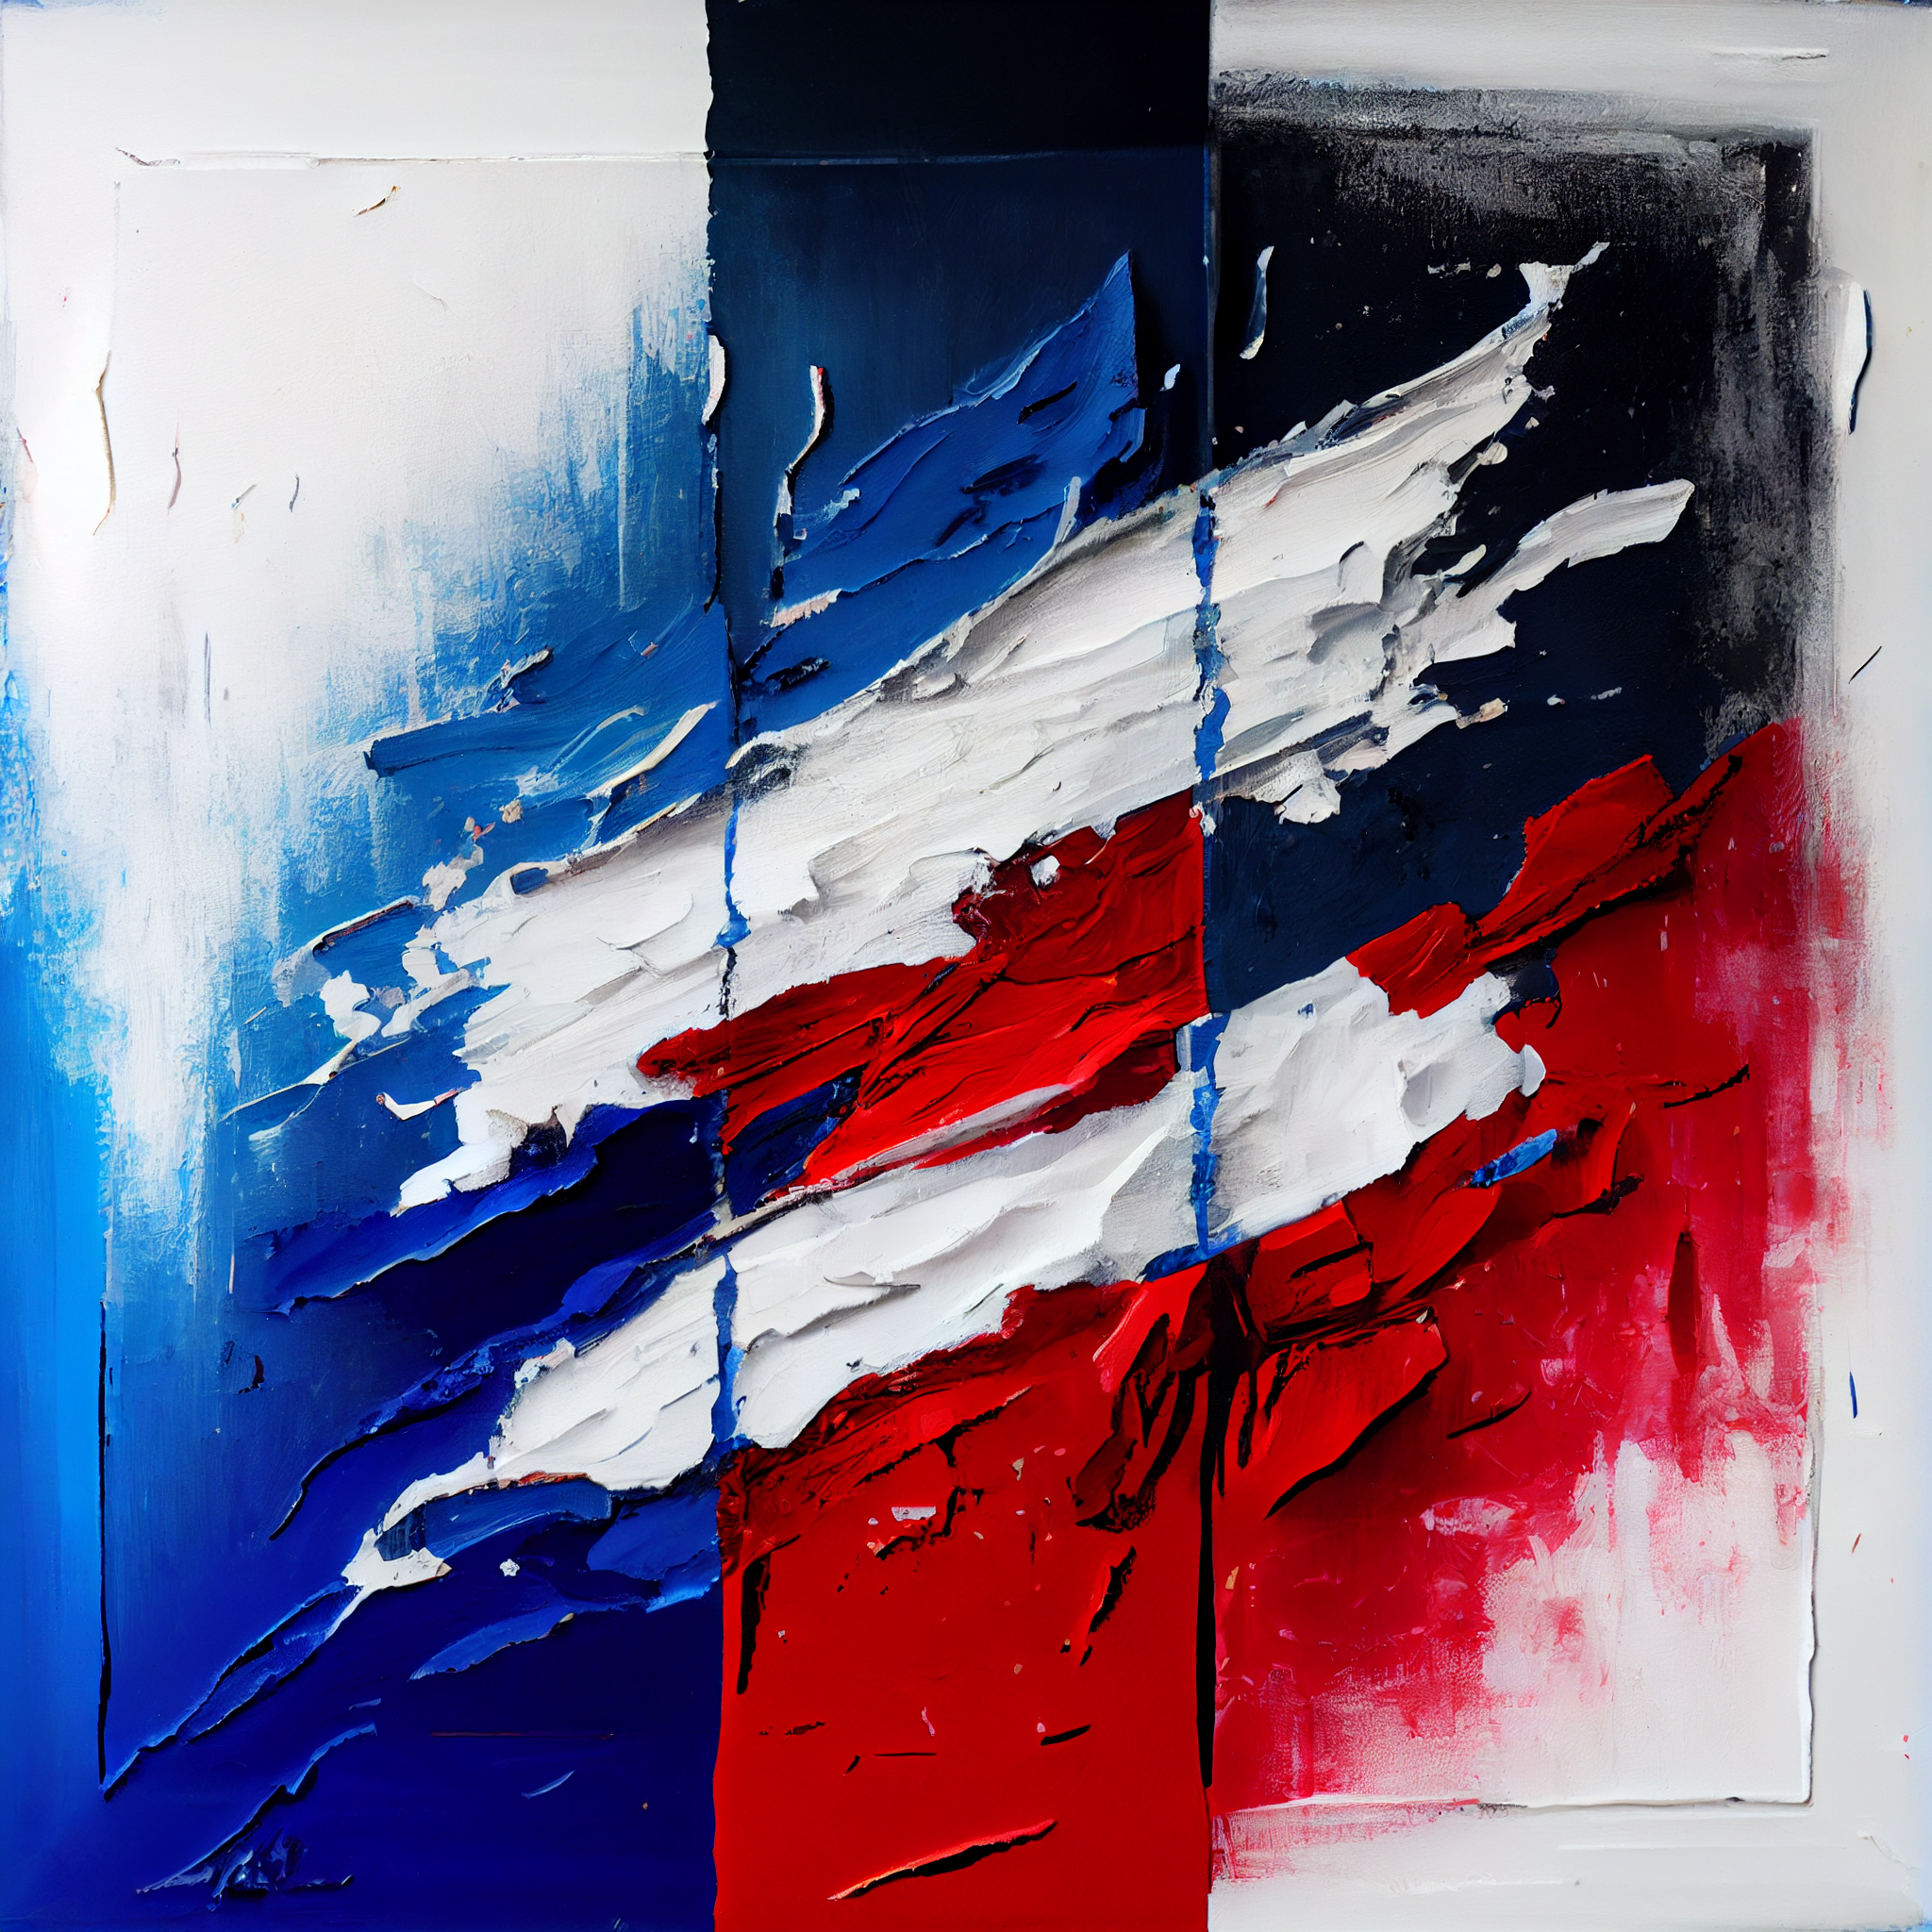 Dynamic and Striking Blue, Red, and White Abstract Art: Elevate Your Decor